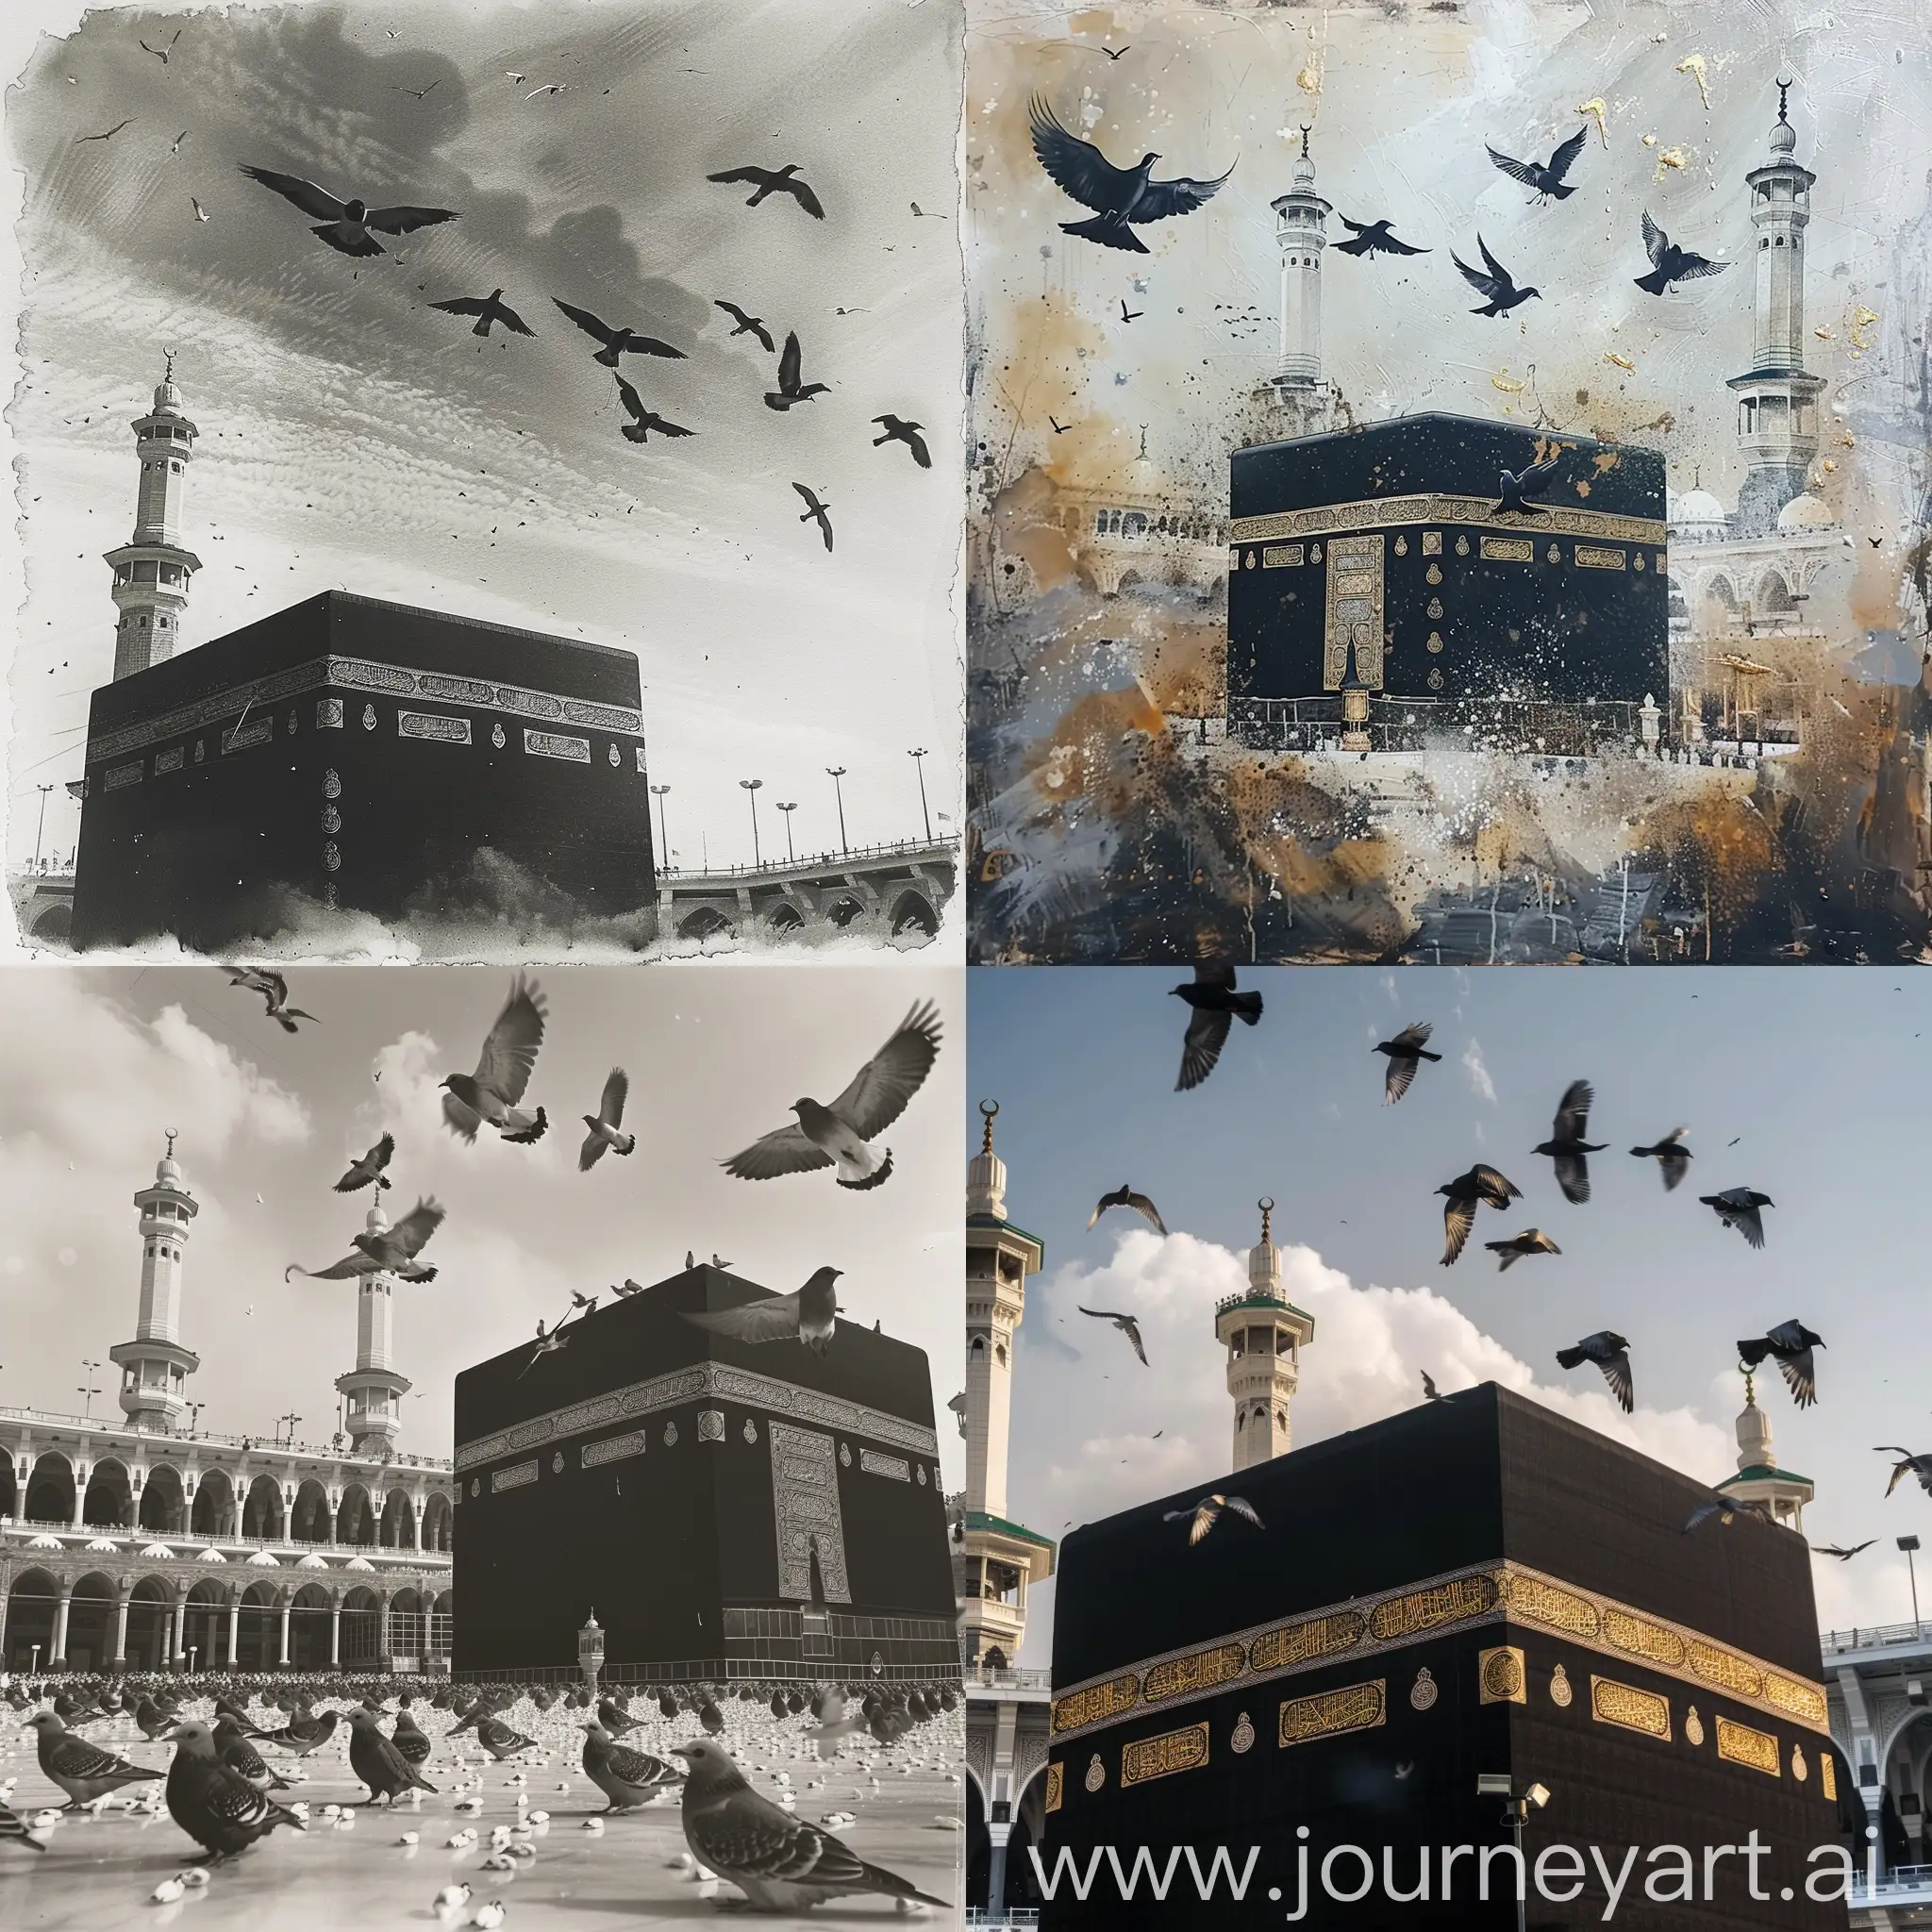 Kaaba-surrounded-by-Birds-in-Serene-Setting